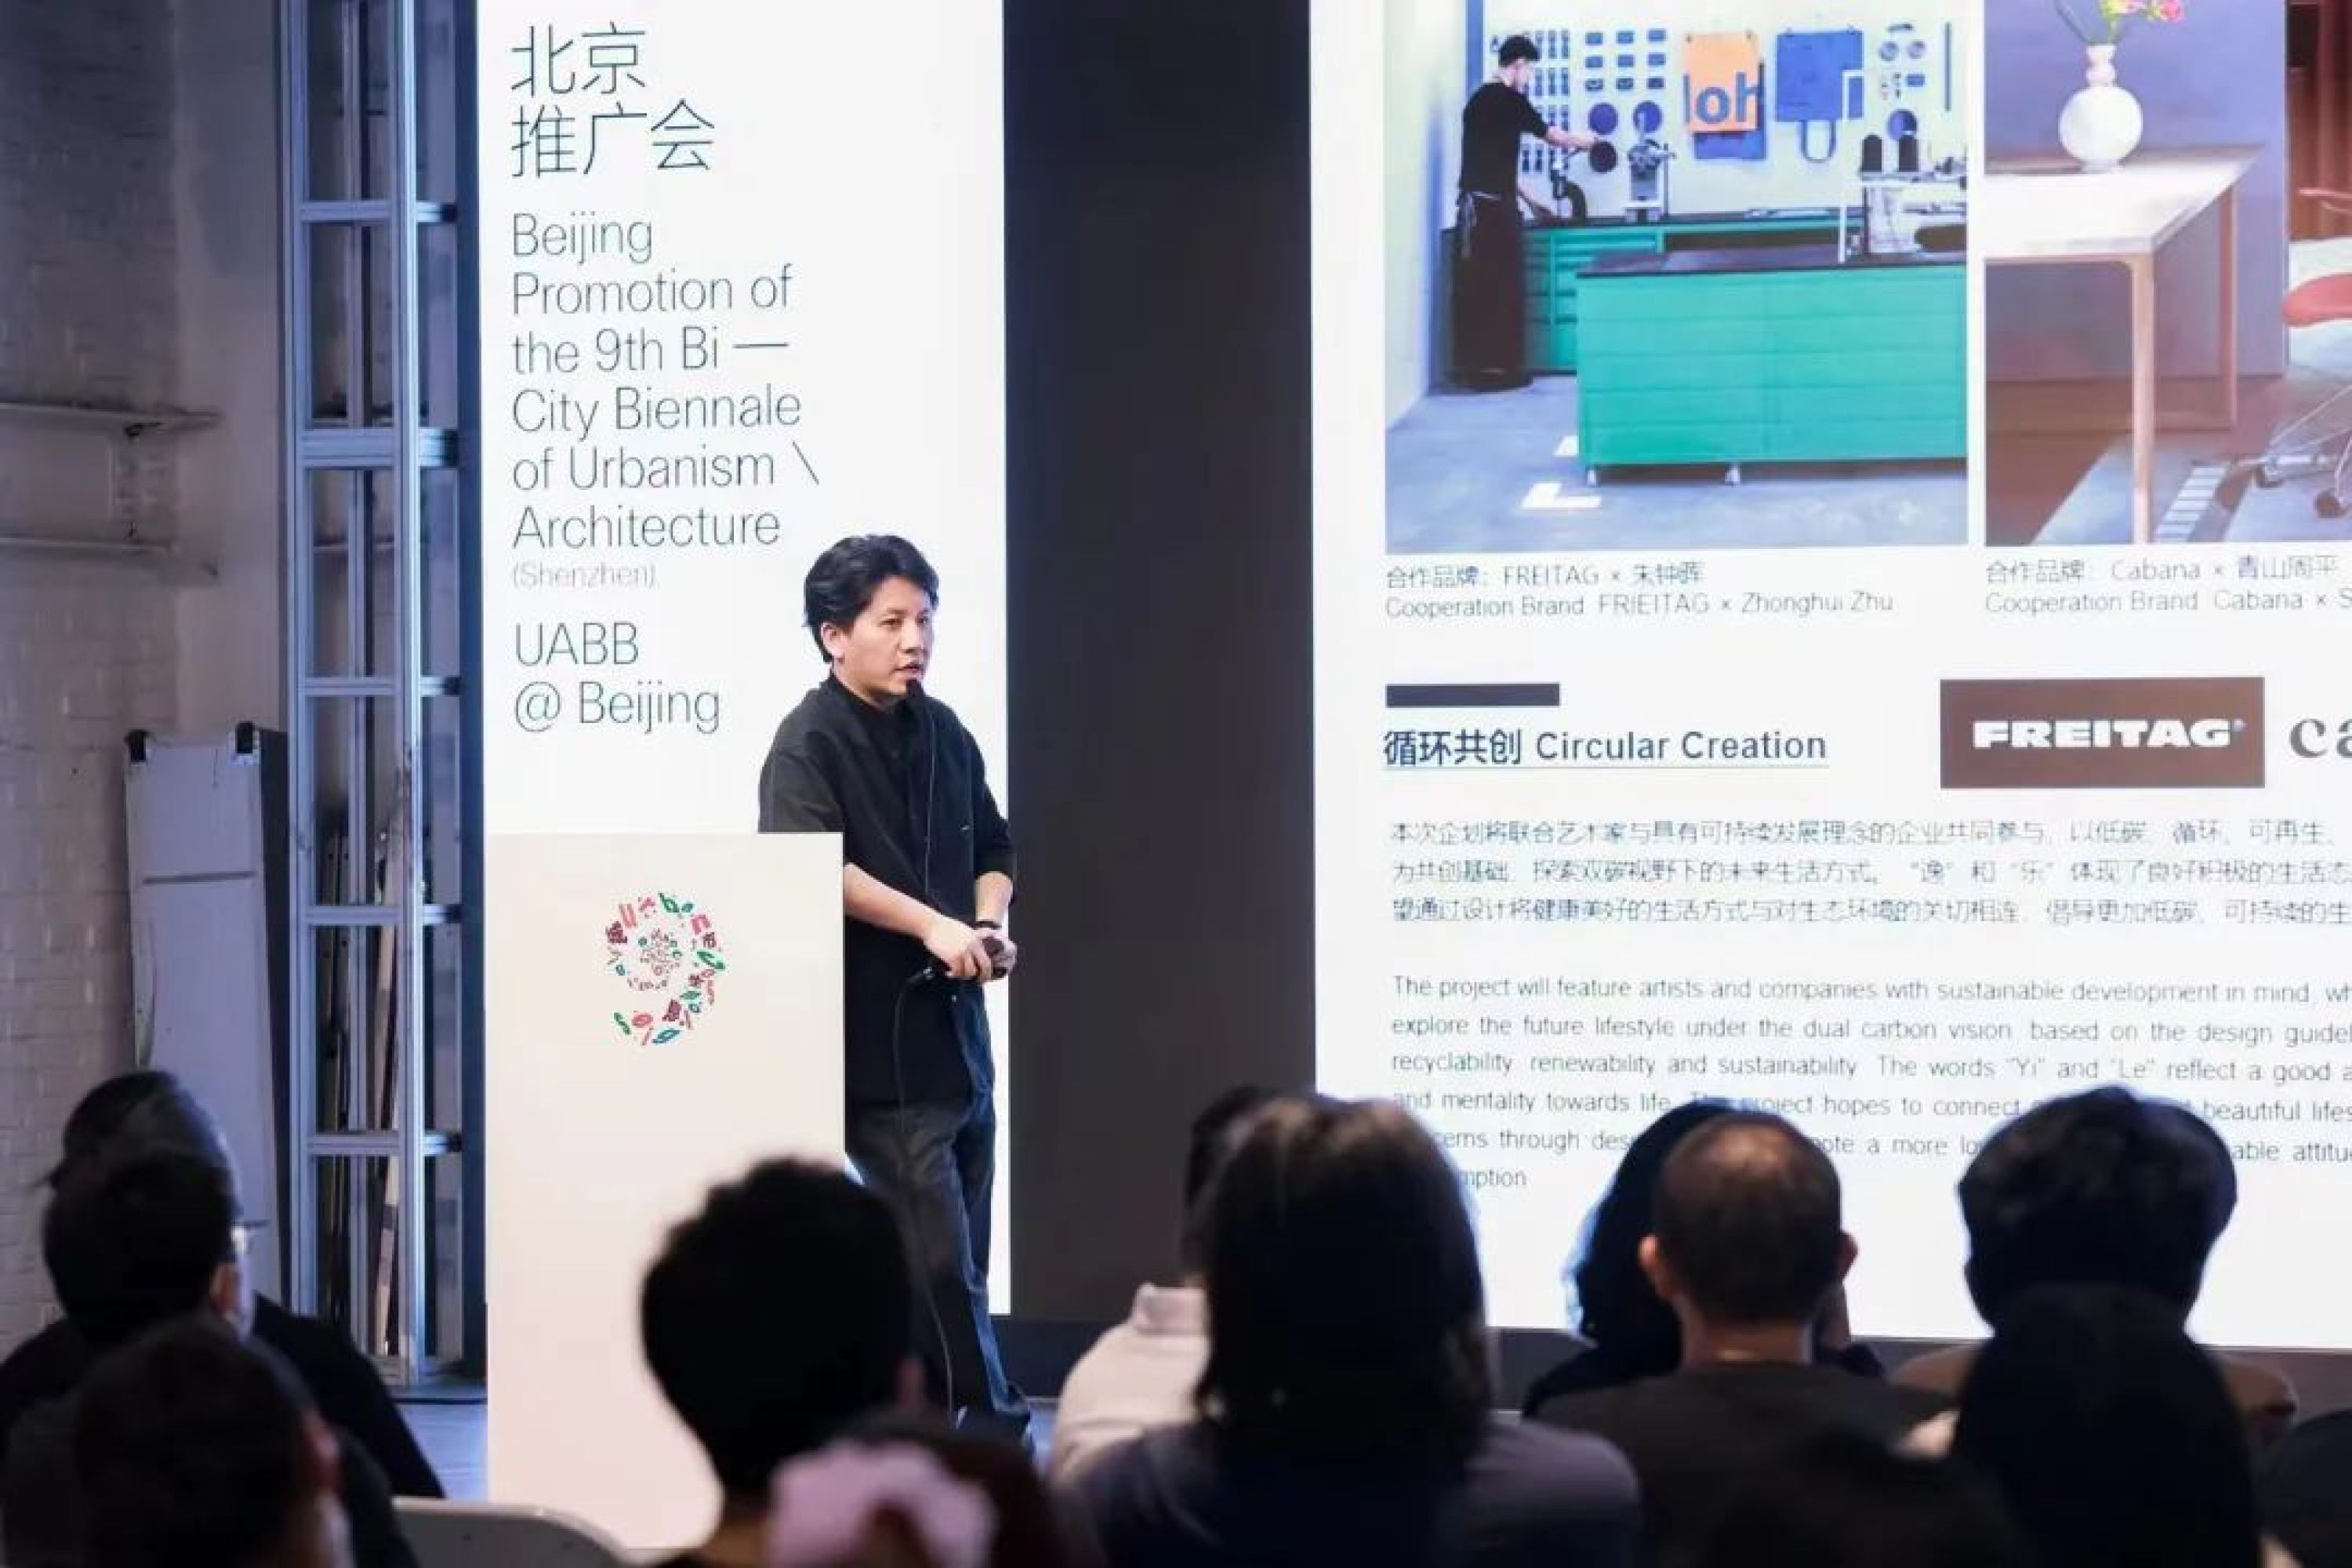 The 9th Bi-City Biennale of Urbanism/Architecture (Shenzhen) Held a Beijing Promotion Event in the 751D·Park